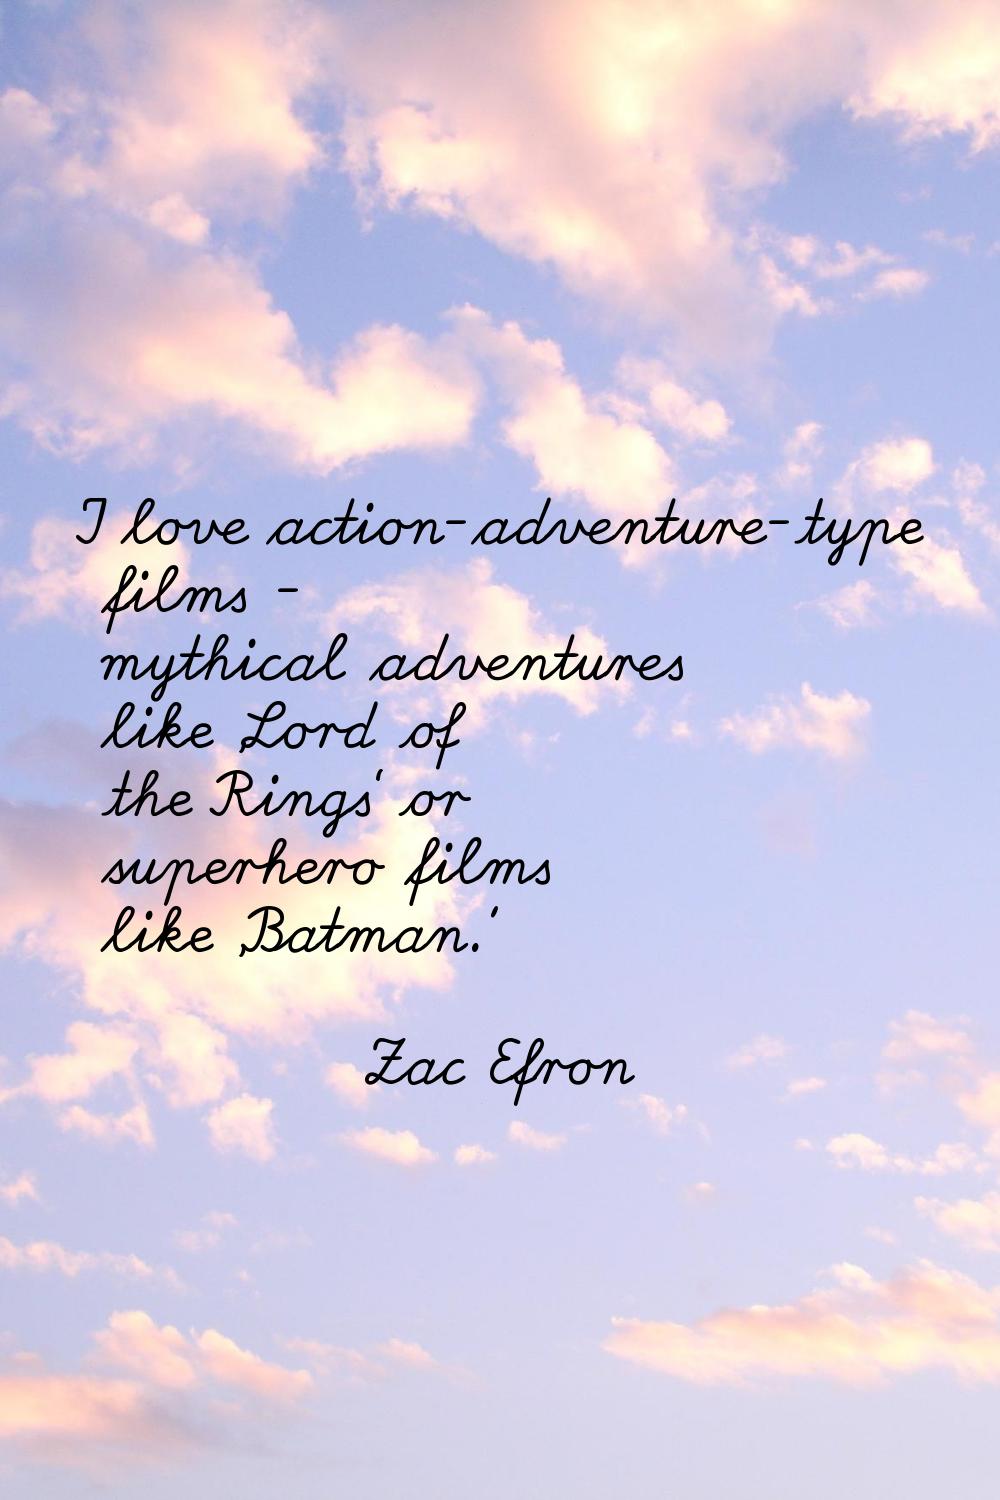 I love action-adventure-type films - mythical adventures like 'Lord of the Rings' or superhero film